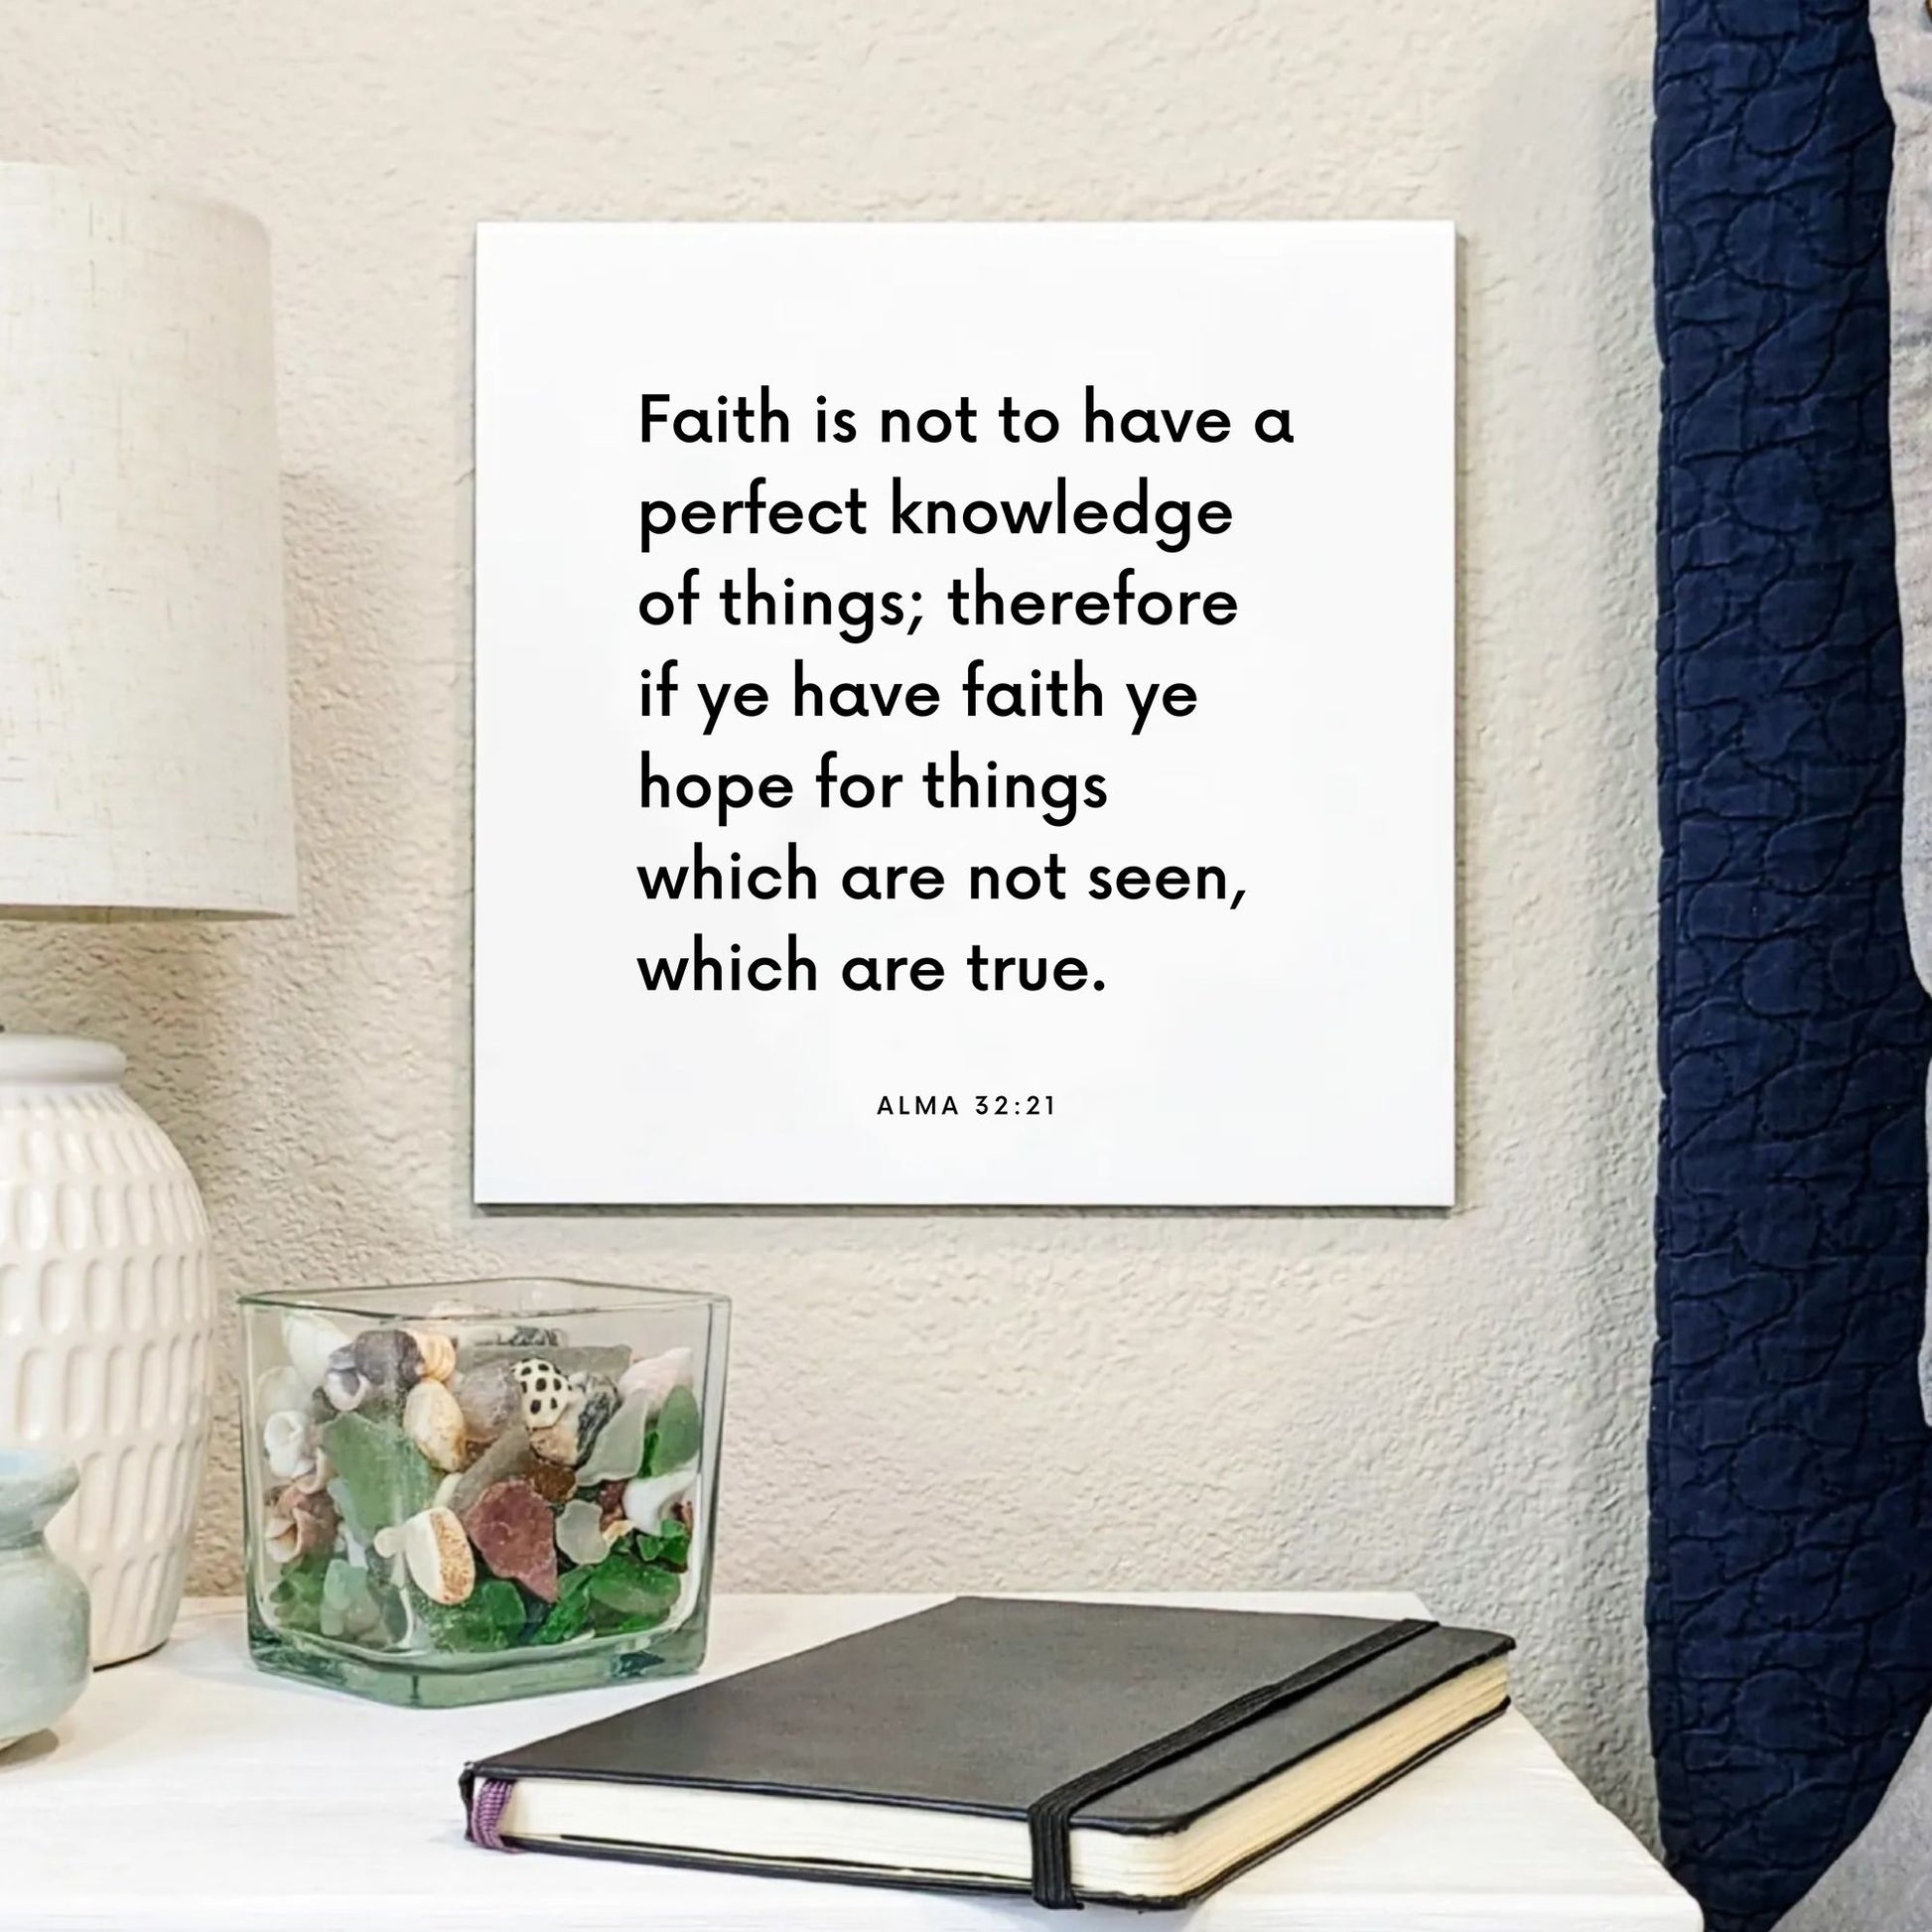 Bedside mouting of the scripture tile for Alma 32:21 - "Faith is not to have a perfect knowledge"